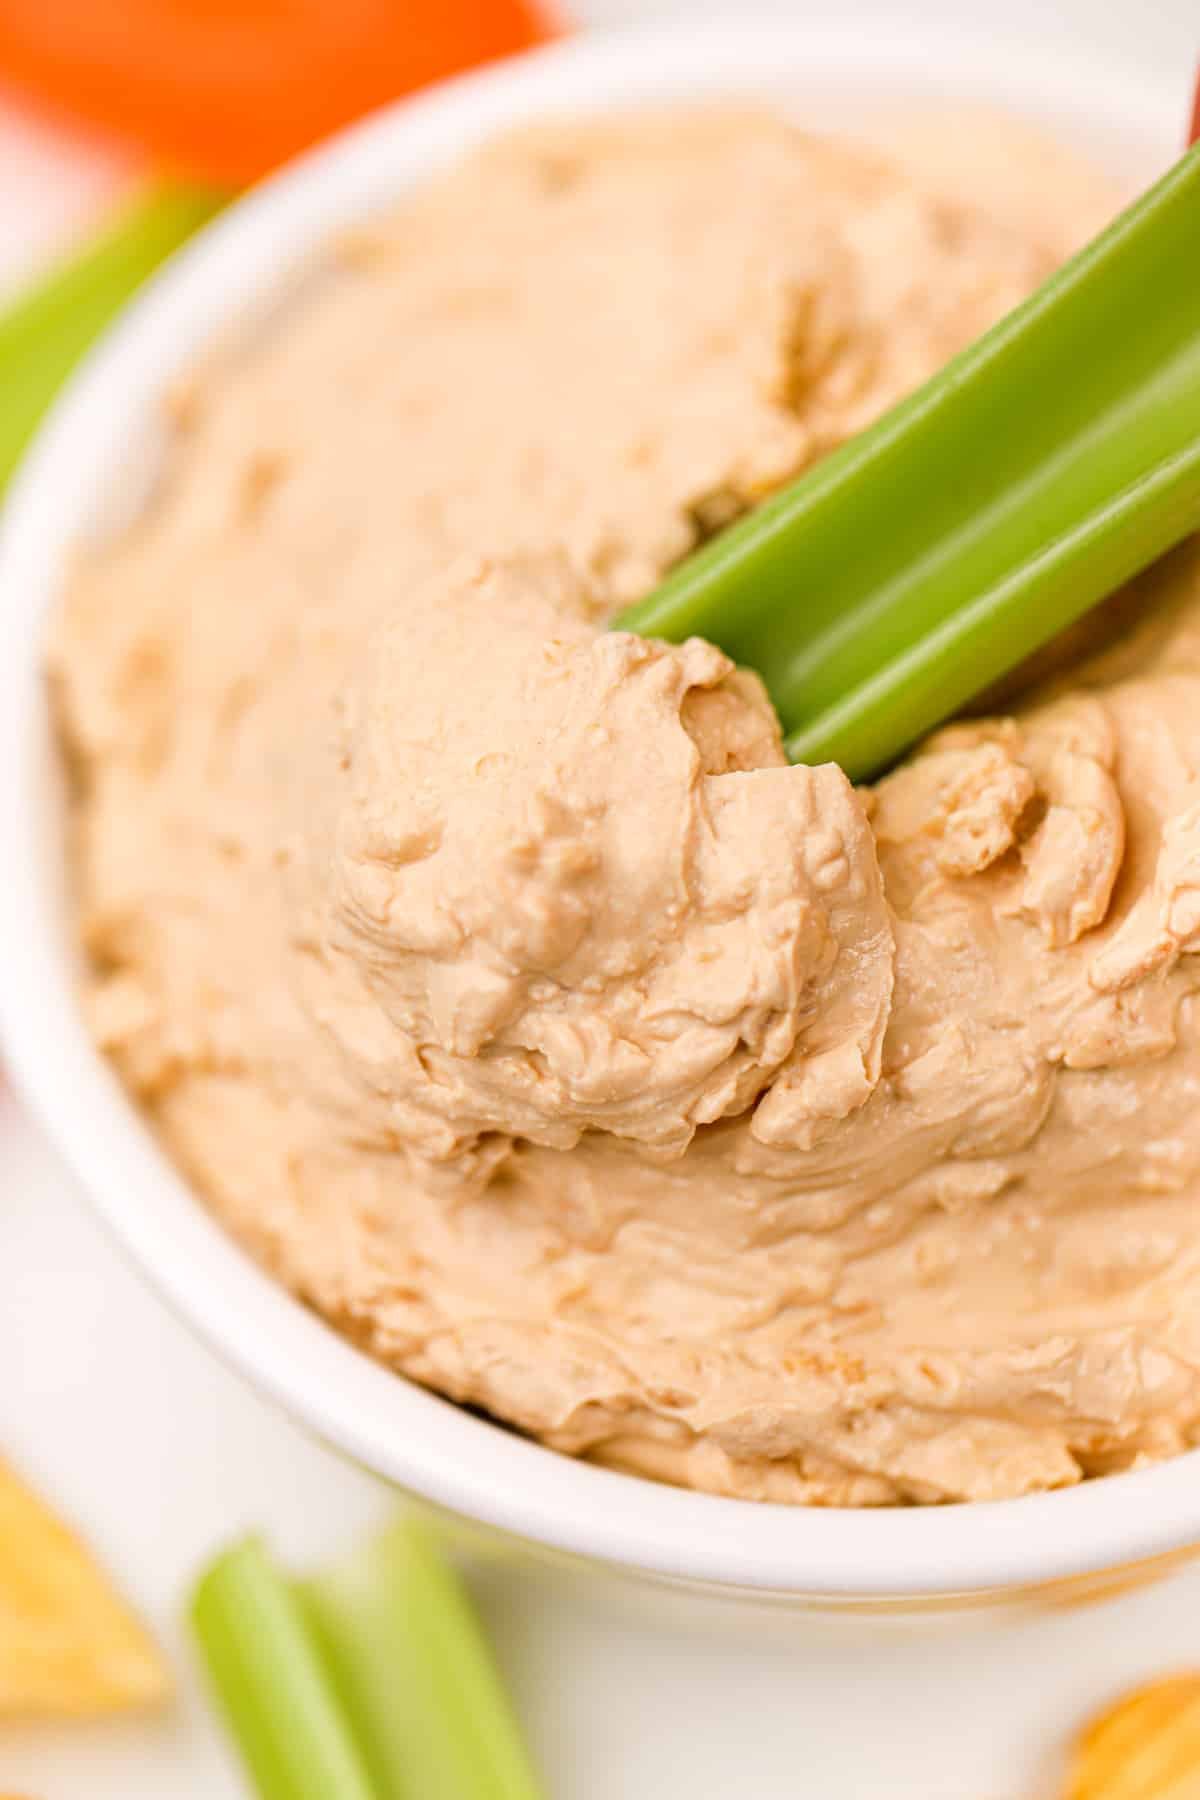 Dipping a celery stick into french onion dip.